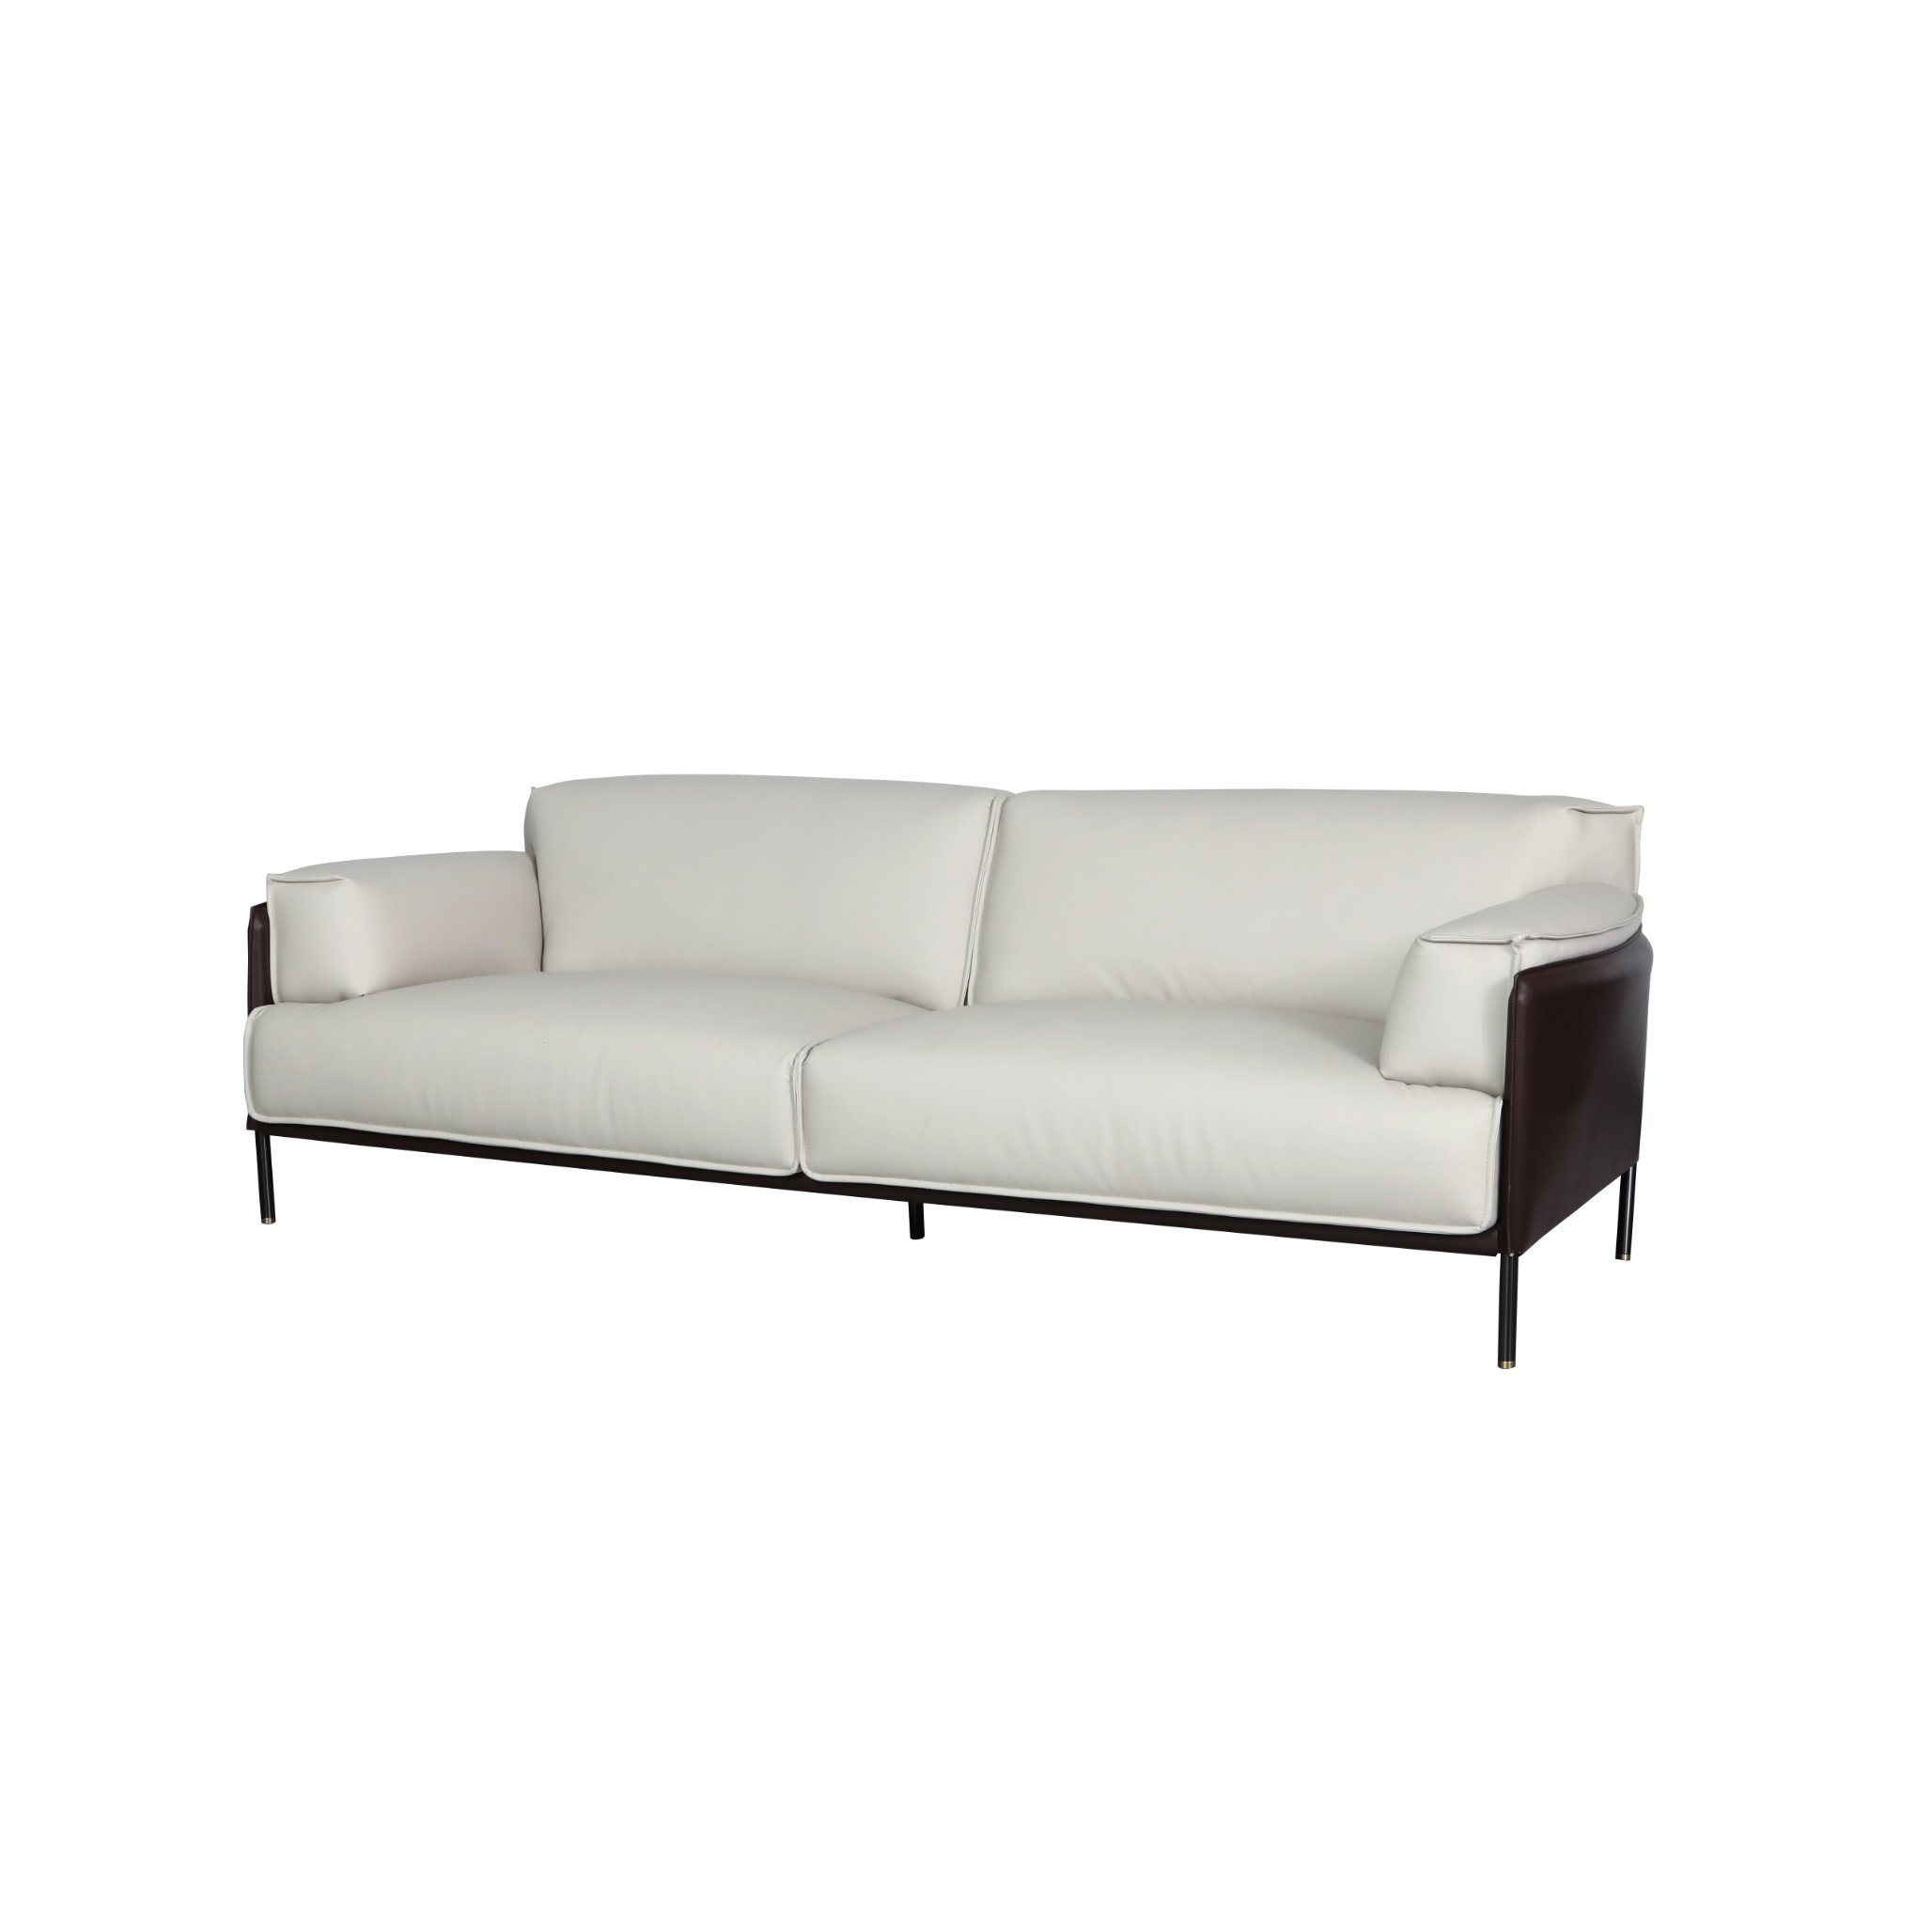 Top Nappa Leather Modern Living Room Furniture